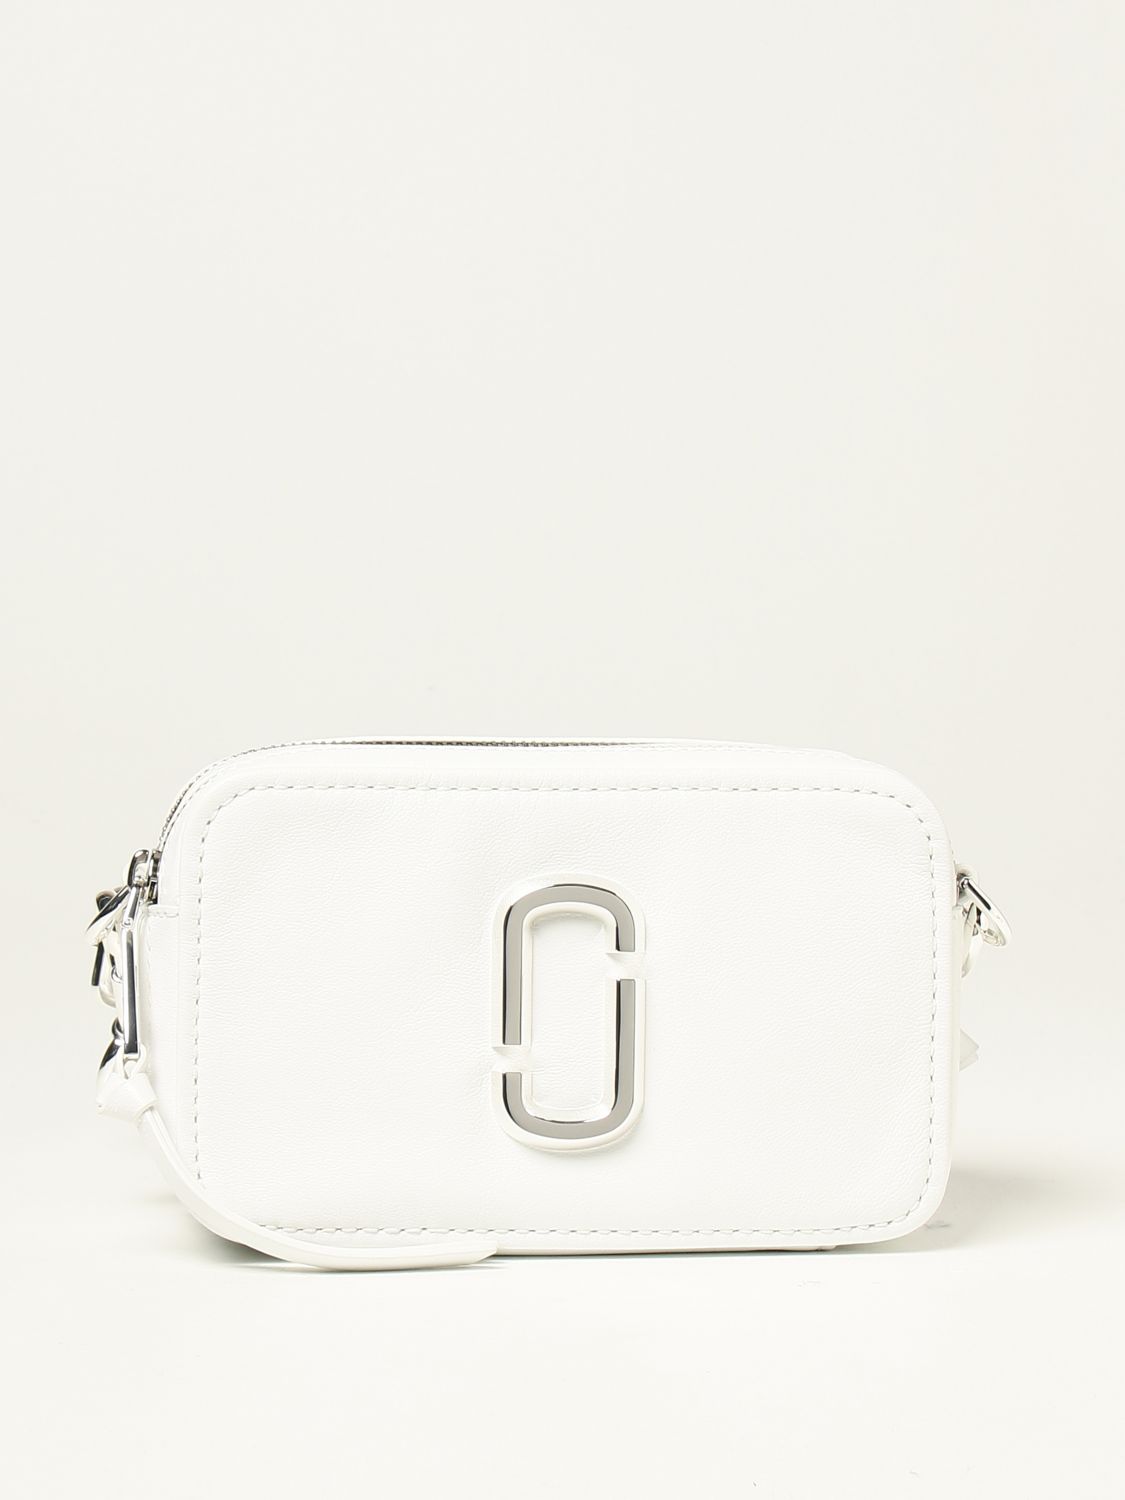 MARC JACOBS: The Snapshot bag in tricolor saffiano leather - White